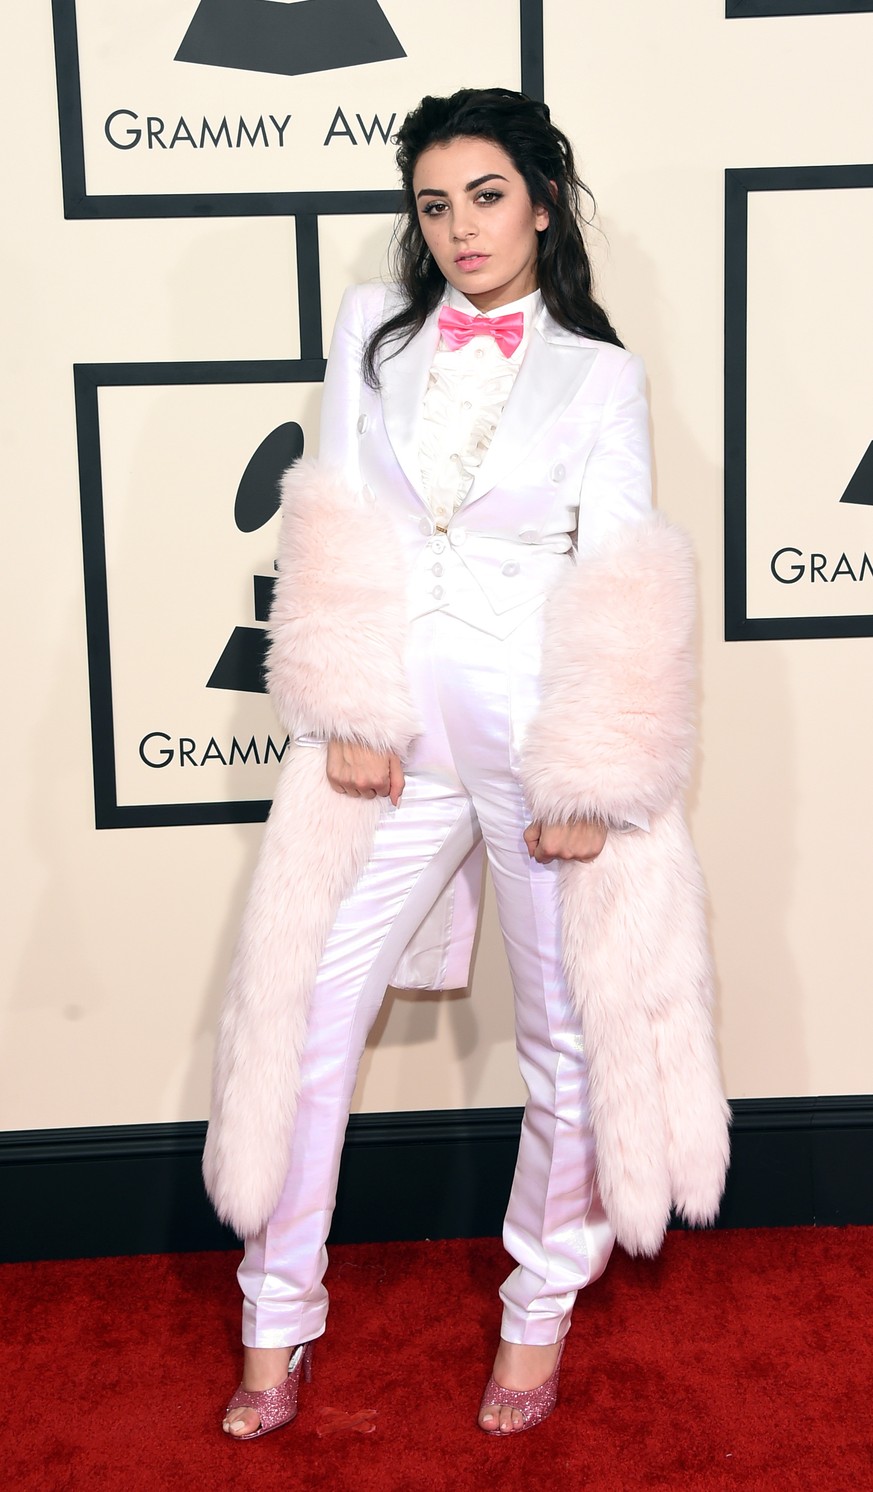 LOS ANGELES, CA - FEBRUARY 08: Singer Charli XCX attends The 57th Annual GRAMMY Awards at the STAPLES Center on February 8, 2015 in Los Angeles, California. (Photo by Jason Merritt/Getty Images)